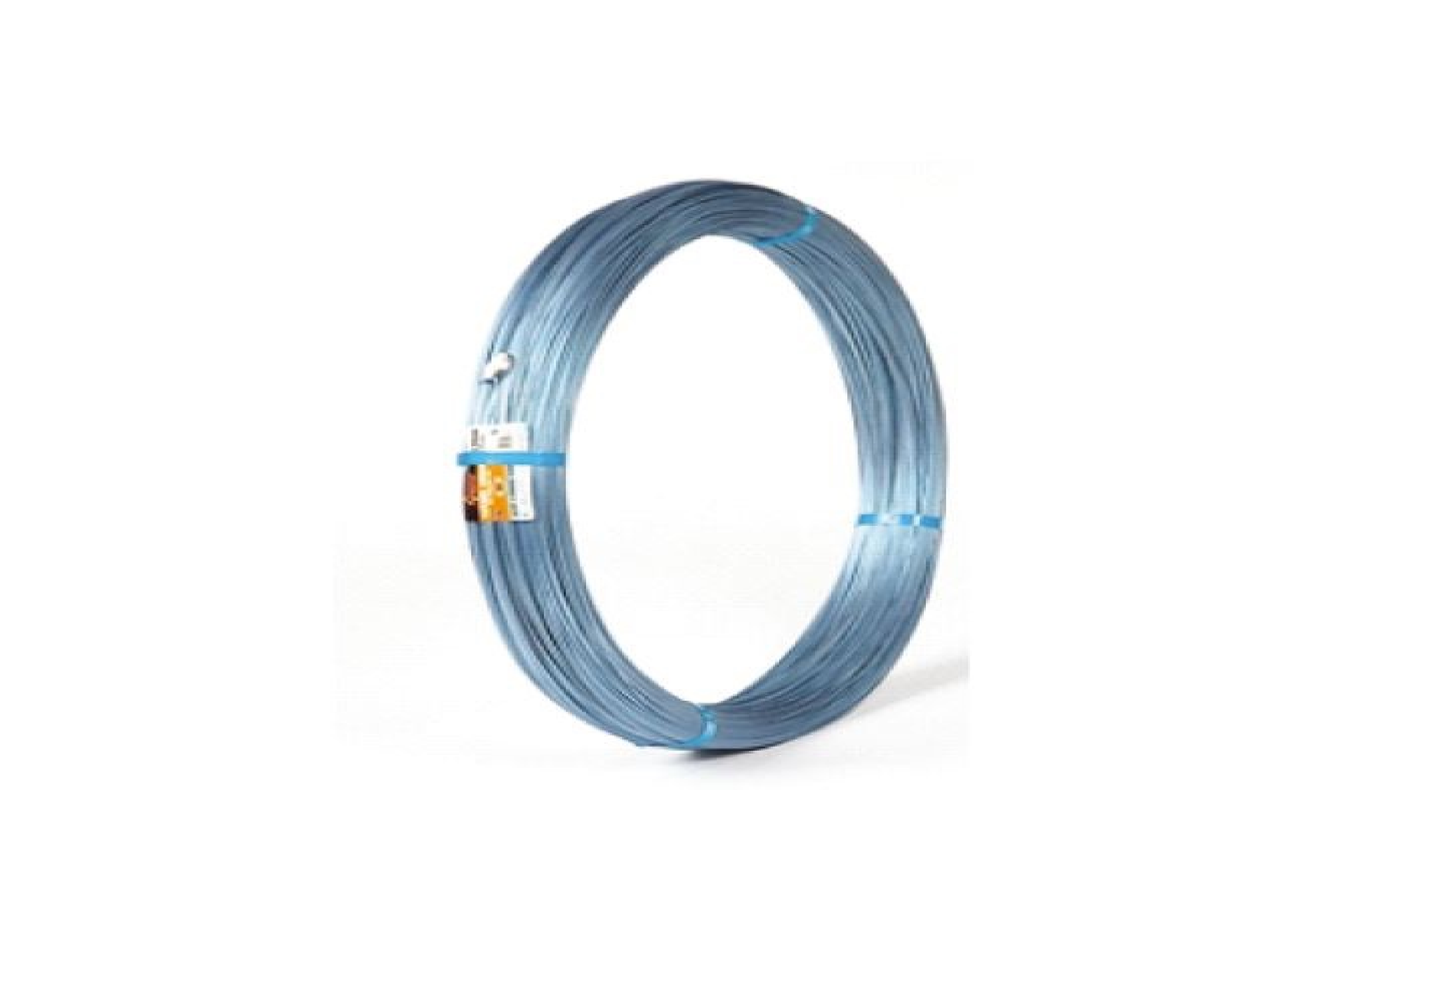 OS Wire Tyeasy Longlife 2.5mm 1500m